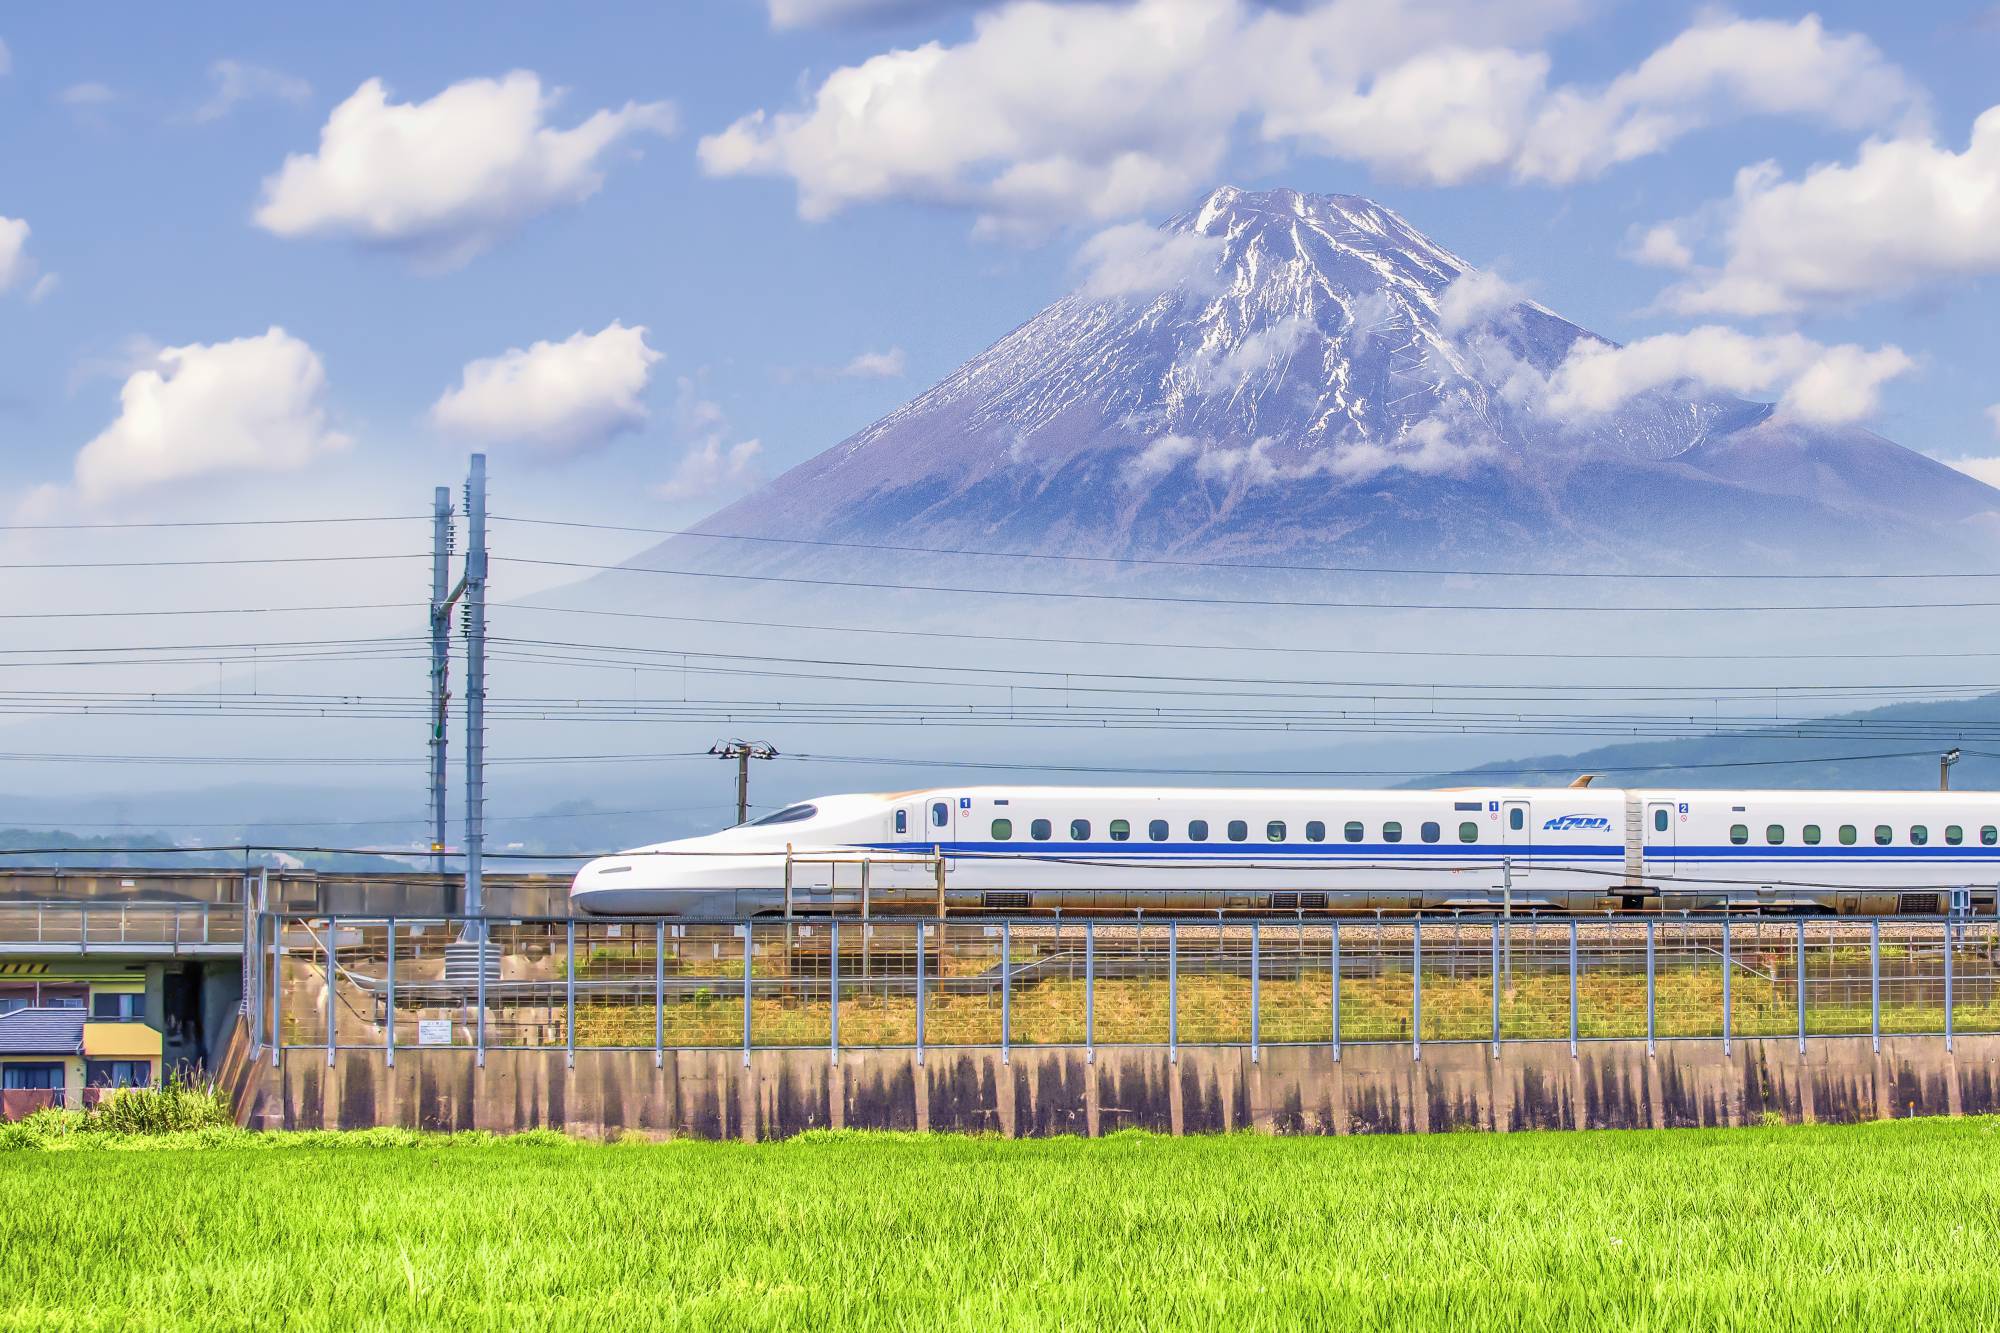 Bullet Train' Goes Off the Rails